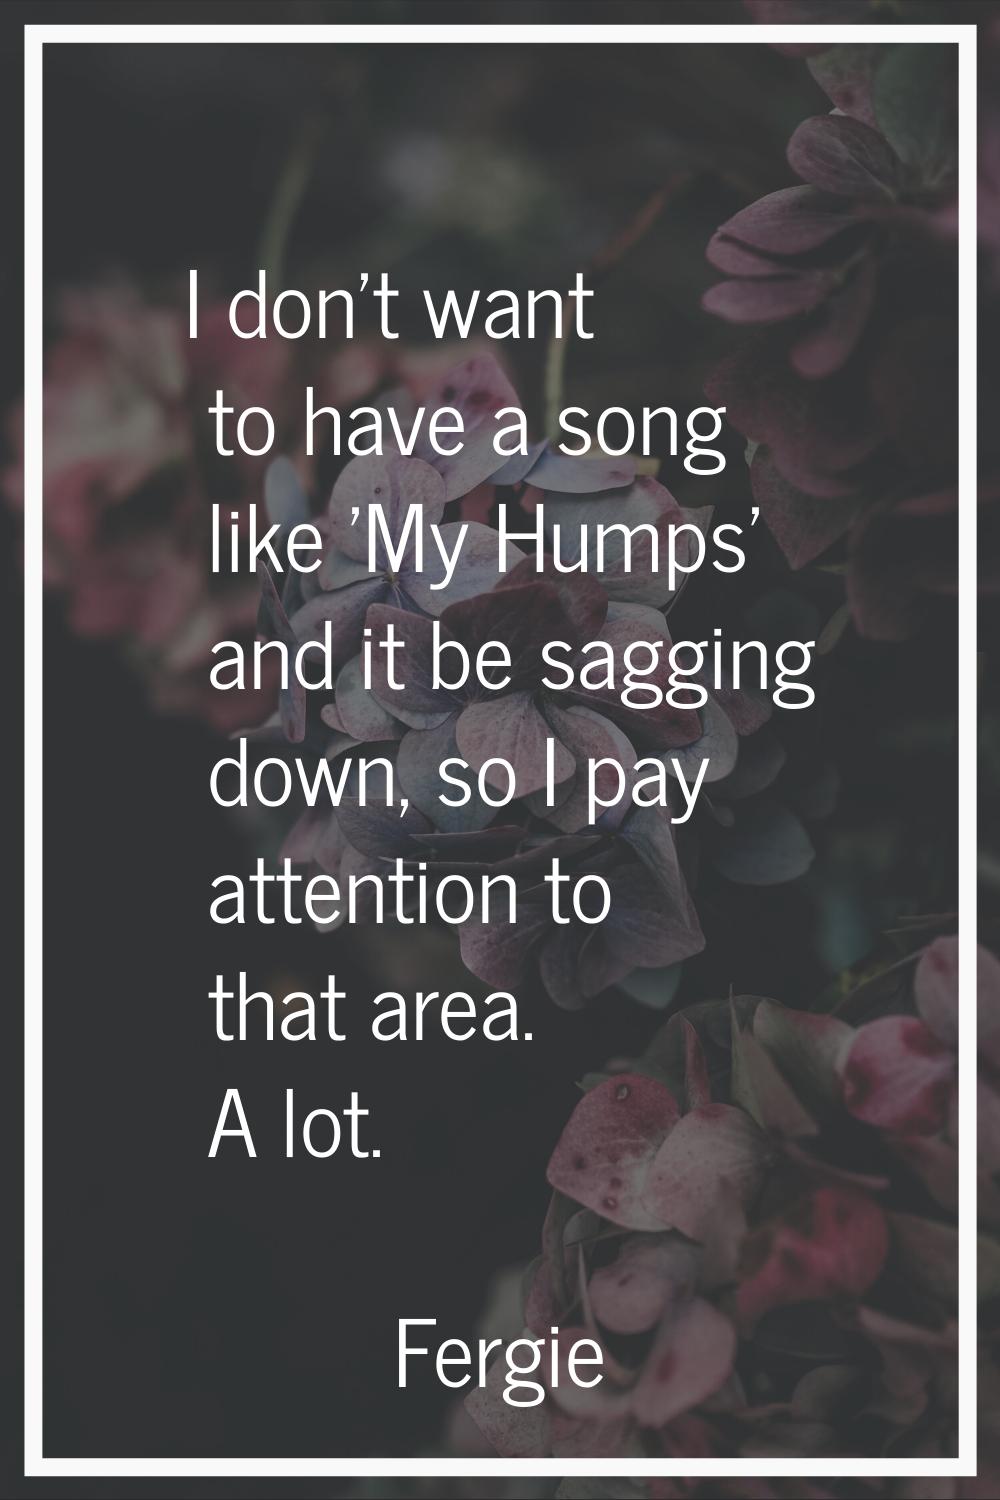 I don't want to have a song like 'My Humps' and it be sagging down, so I pay attention to that area